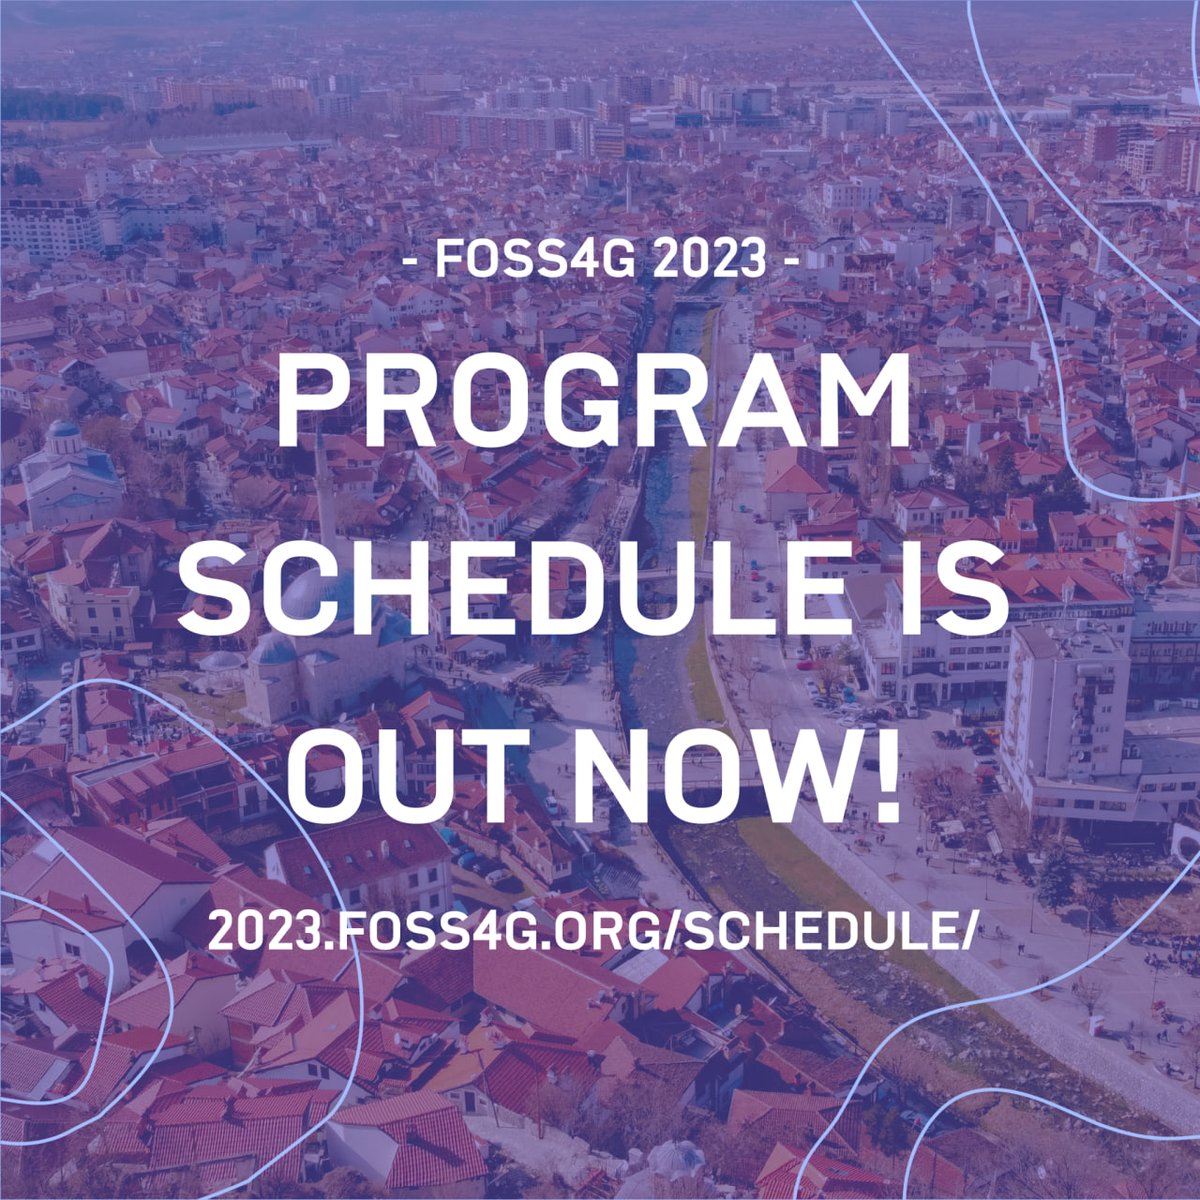 🎉 The wait is over! The General  and Academic Track schedules are out!

🌐 With a fusion of practical applications and scholarly insights, #FOSS4G2023 promises an experience like no other. 

Check out the complete schedules: 2023.foss4g.org/schedule/ and prepare for adventure!🚀